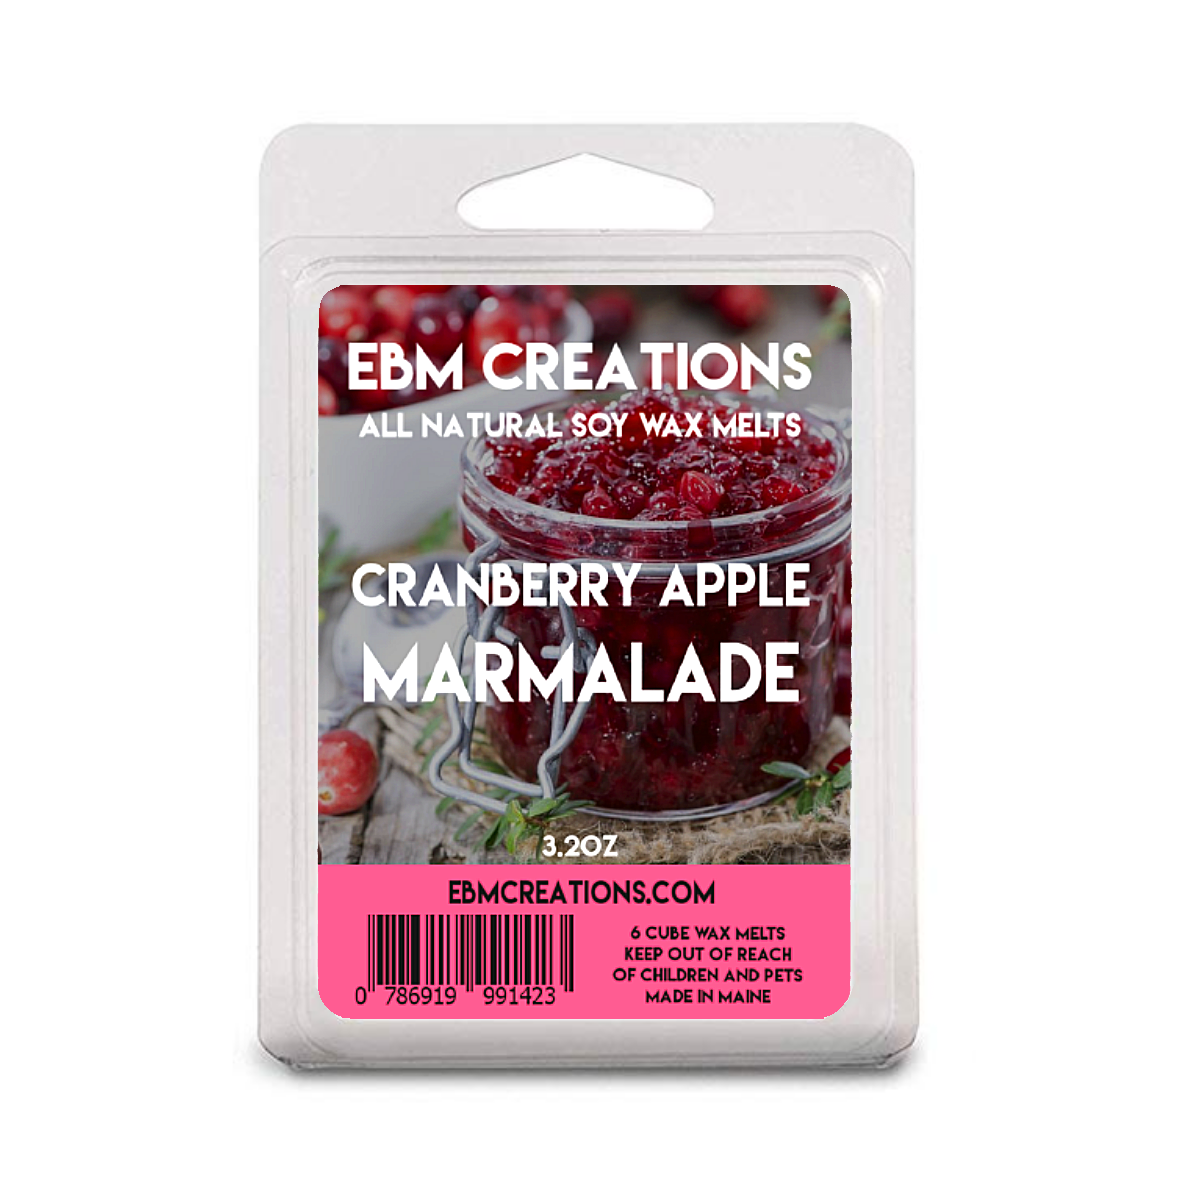 Cranberry Apple Marmalade - 3.2 oz Clamshell